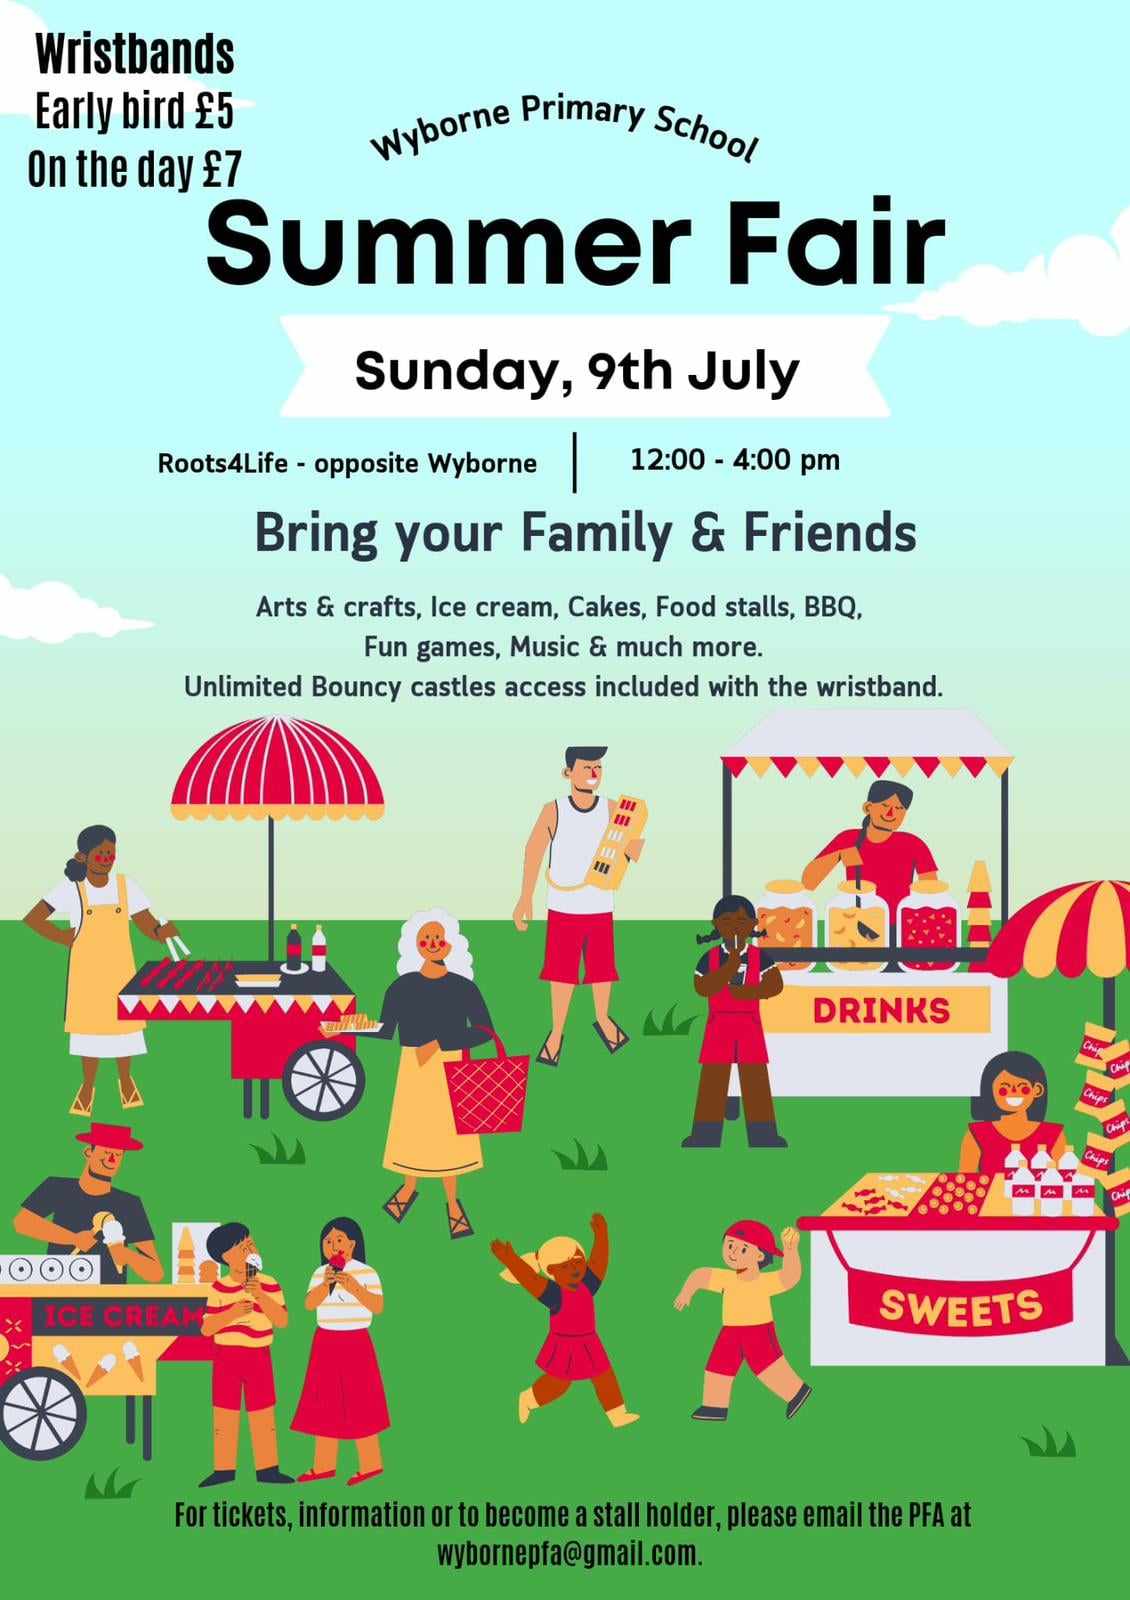 Summer fair flyer with event information and people enjoying food stalls in a park